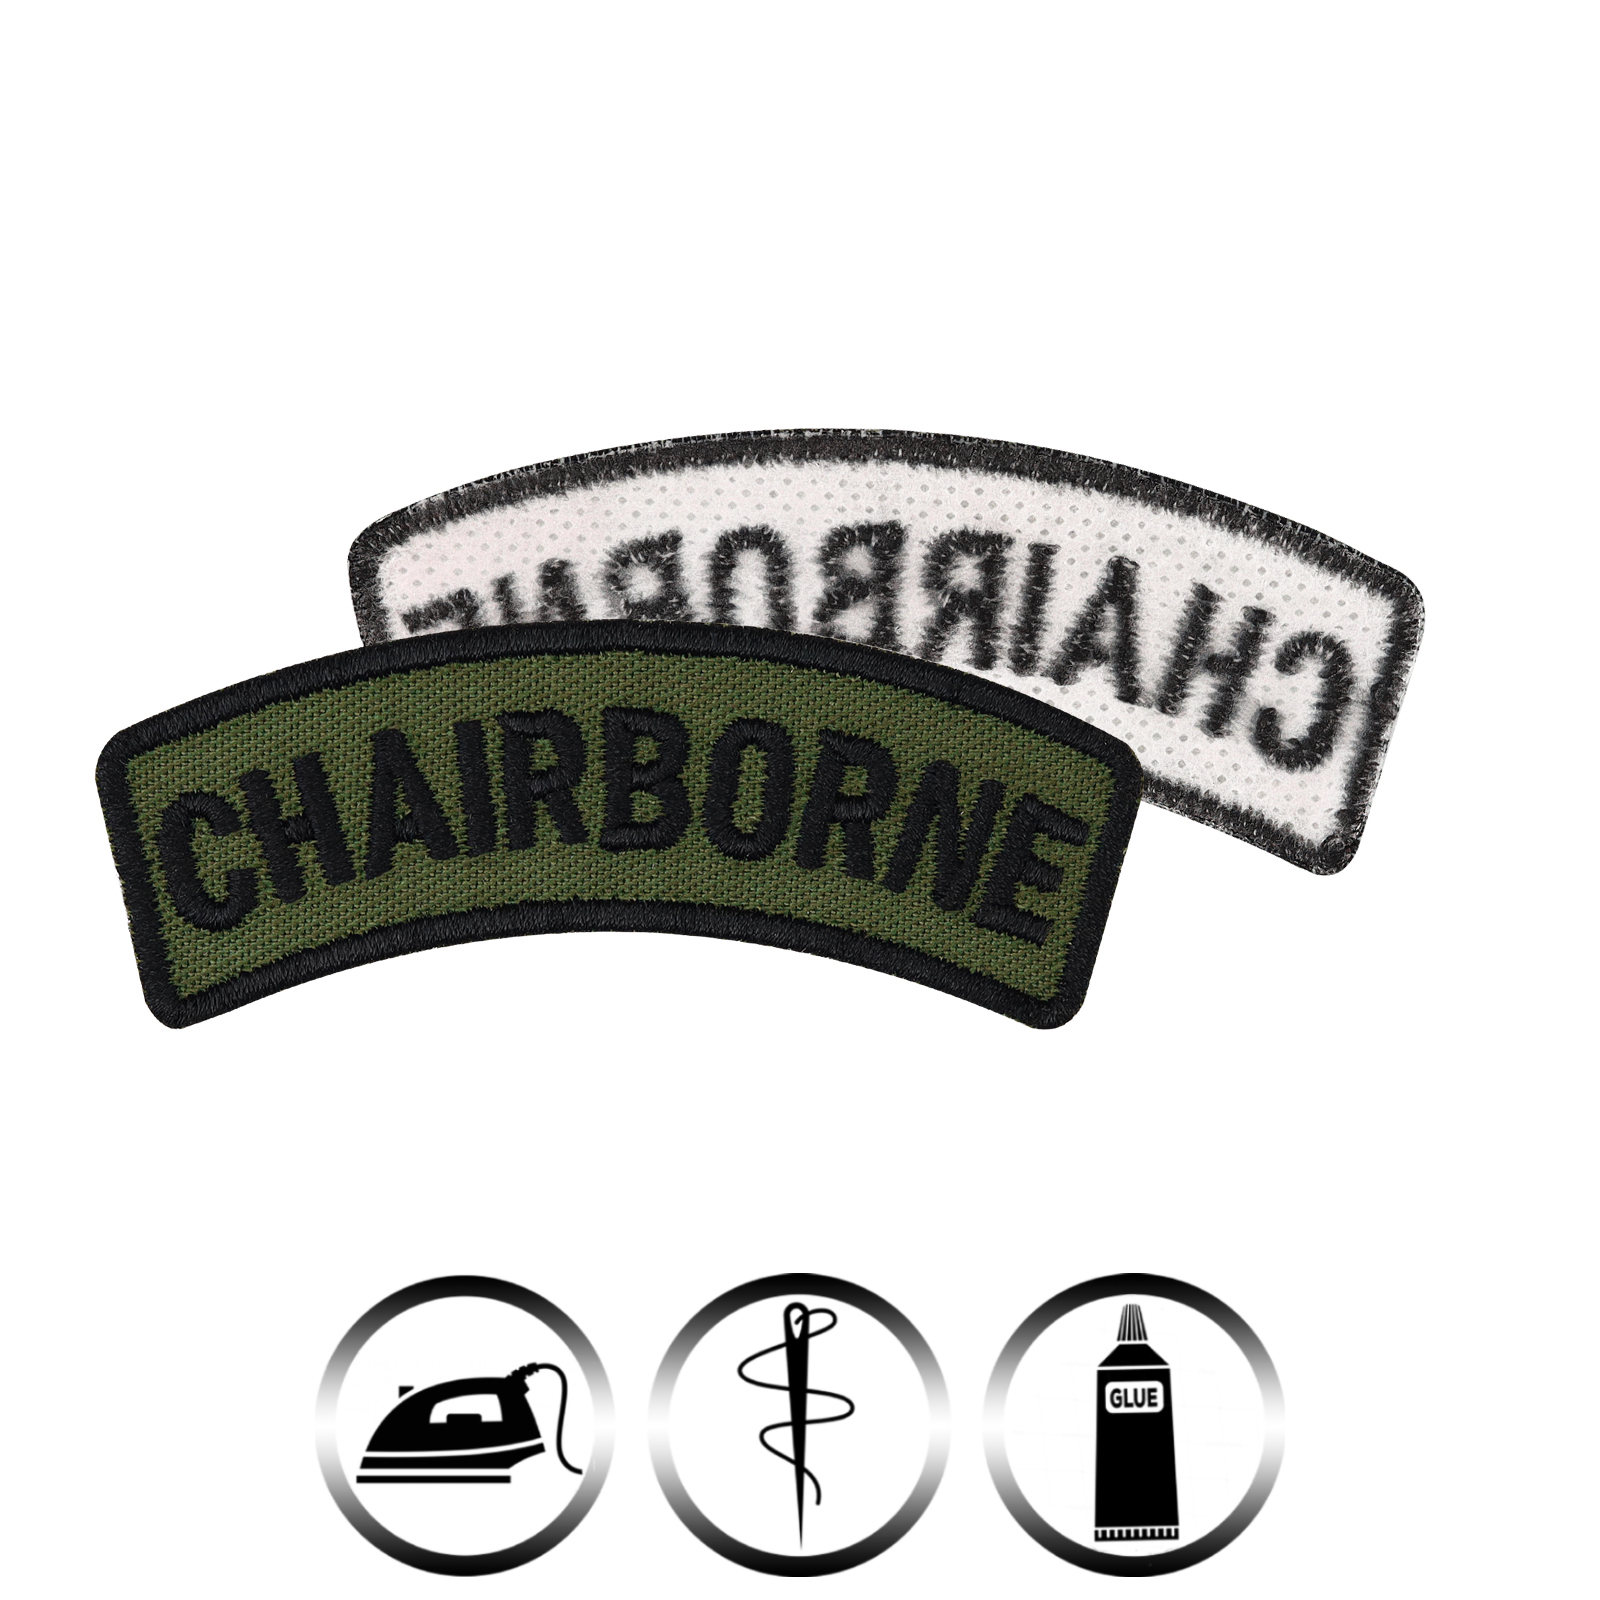 Chairborne - Patch